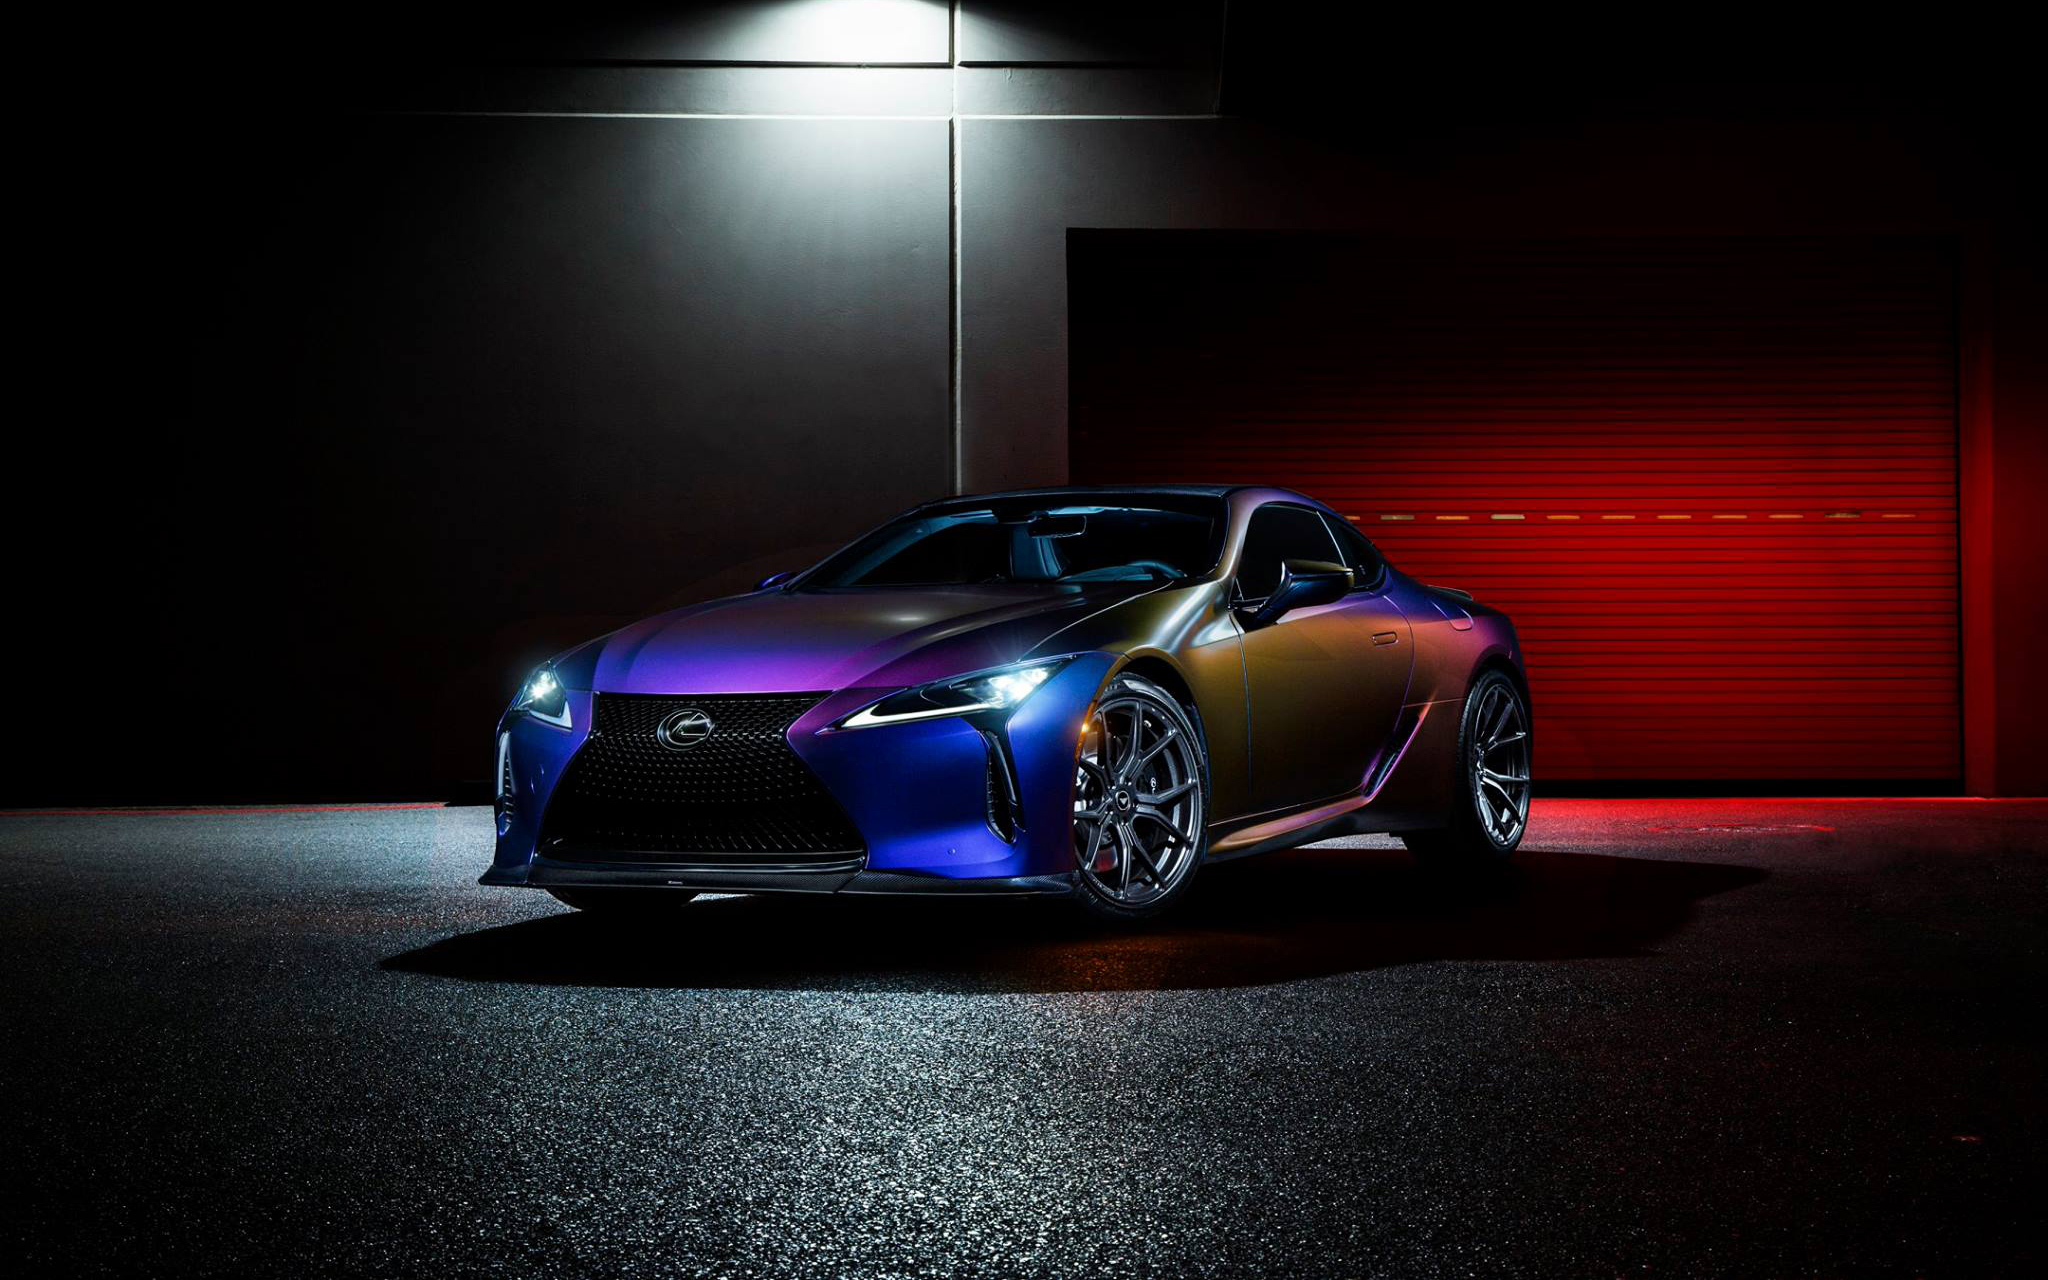 2018 Lexus LC Luxury Coupe Wallpapers | HD Wallpapers